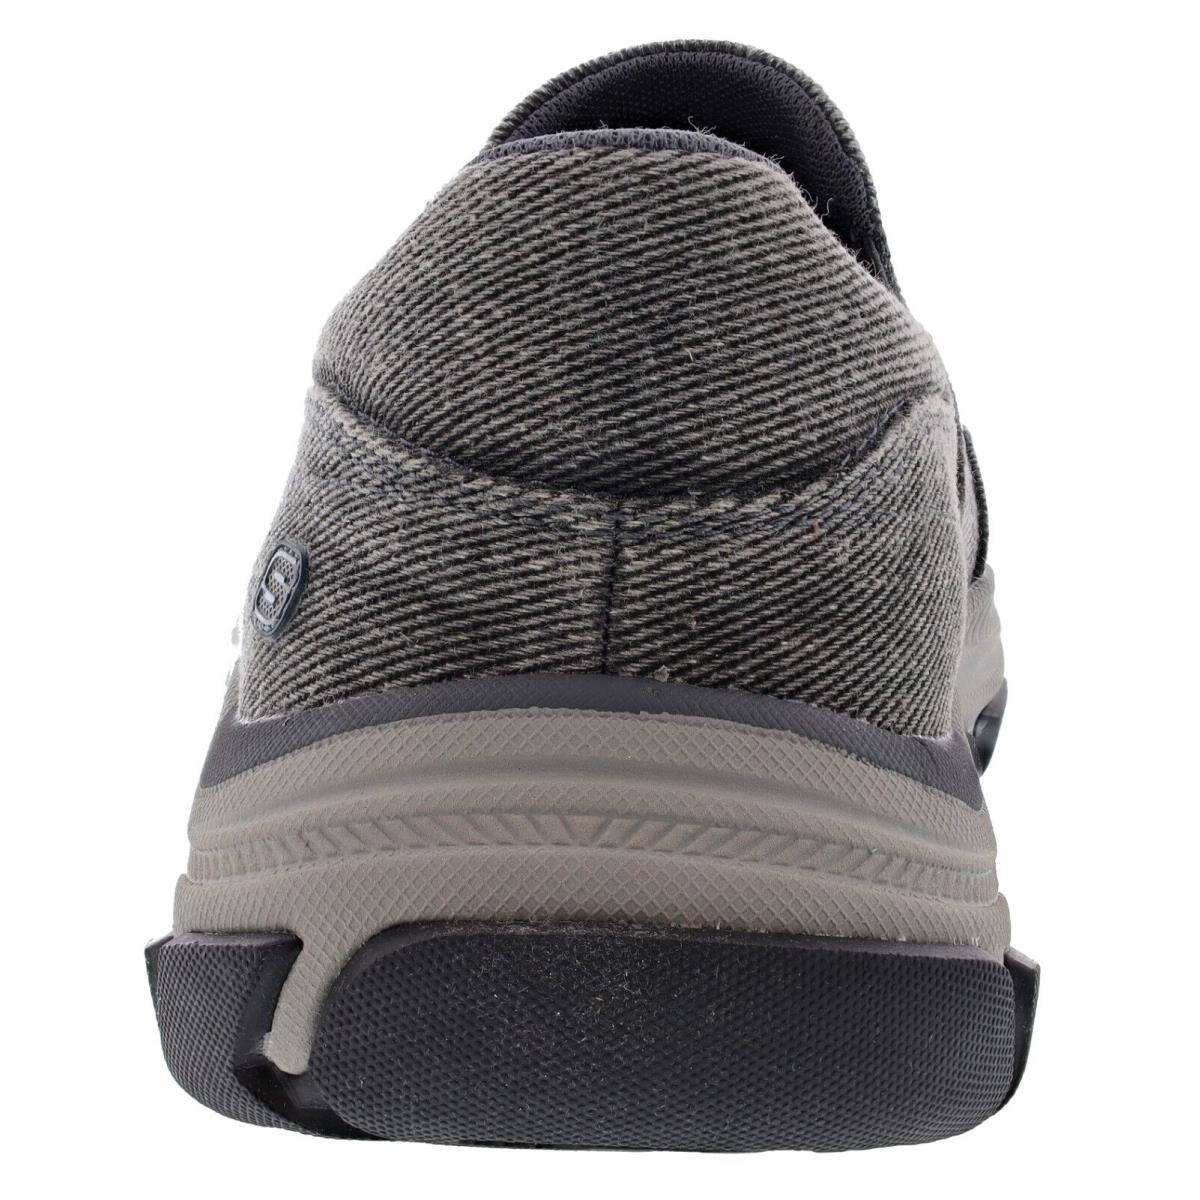 Skechers shoes Relaxed Fallston 2